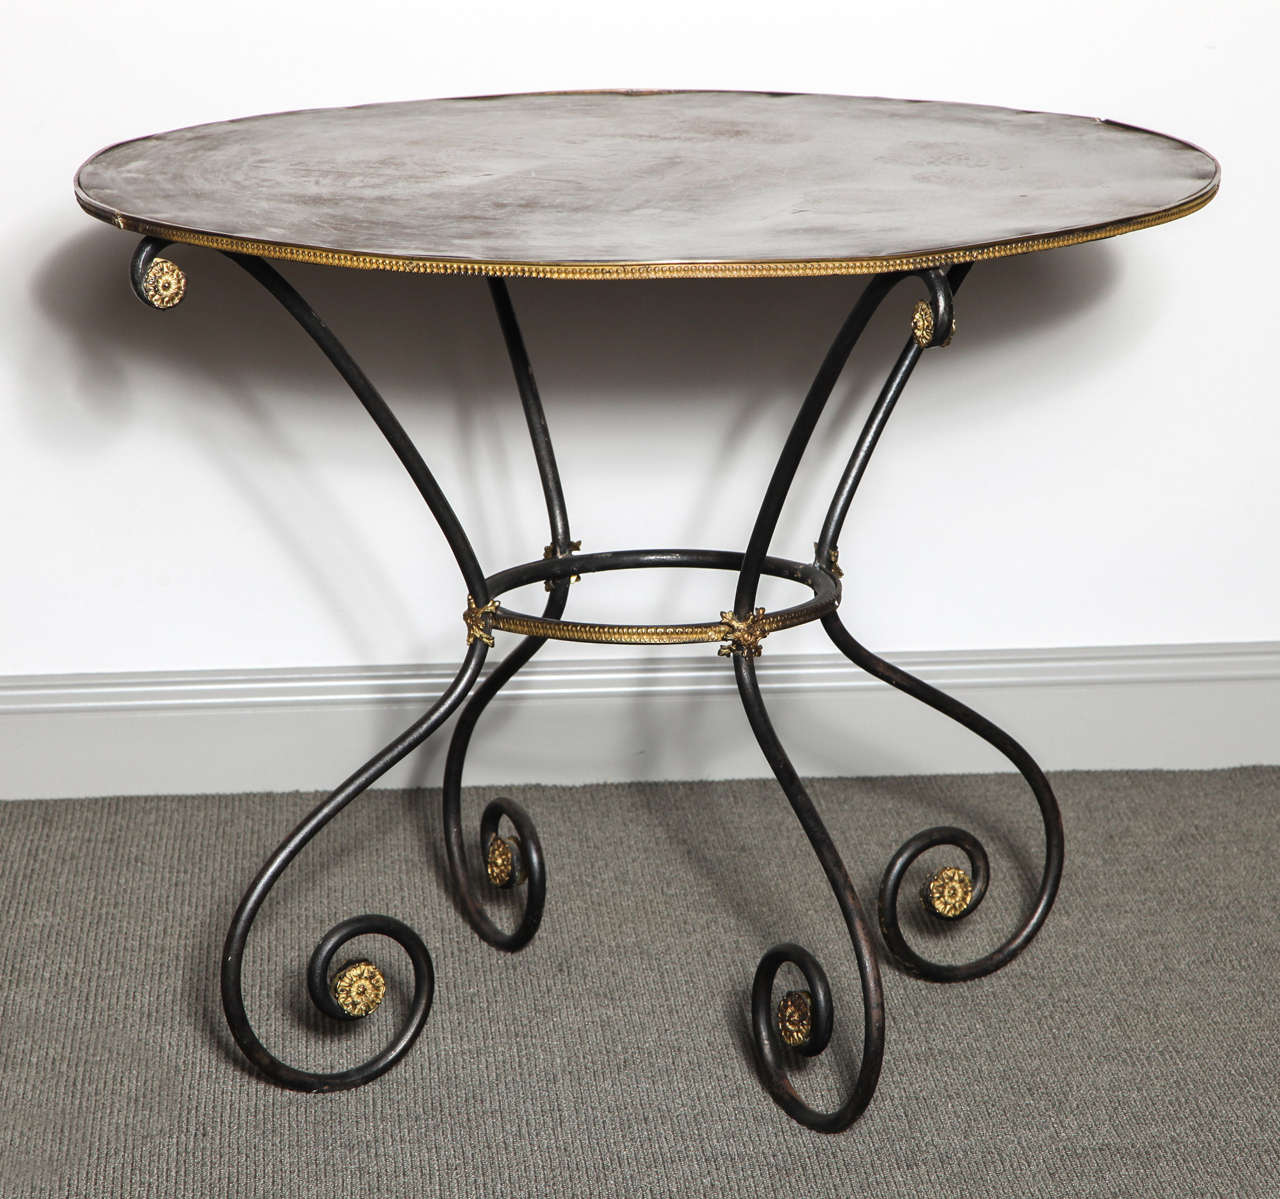 Pair of wrought iron gueridon tables with bronze rosette details and edges, originally found in a private estate outside of Paris.